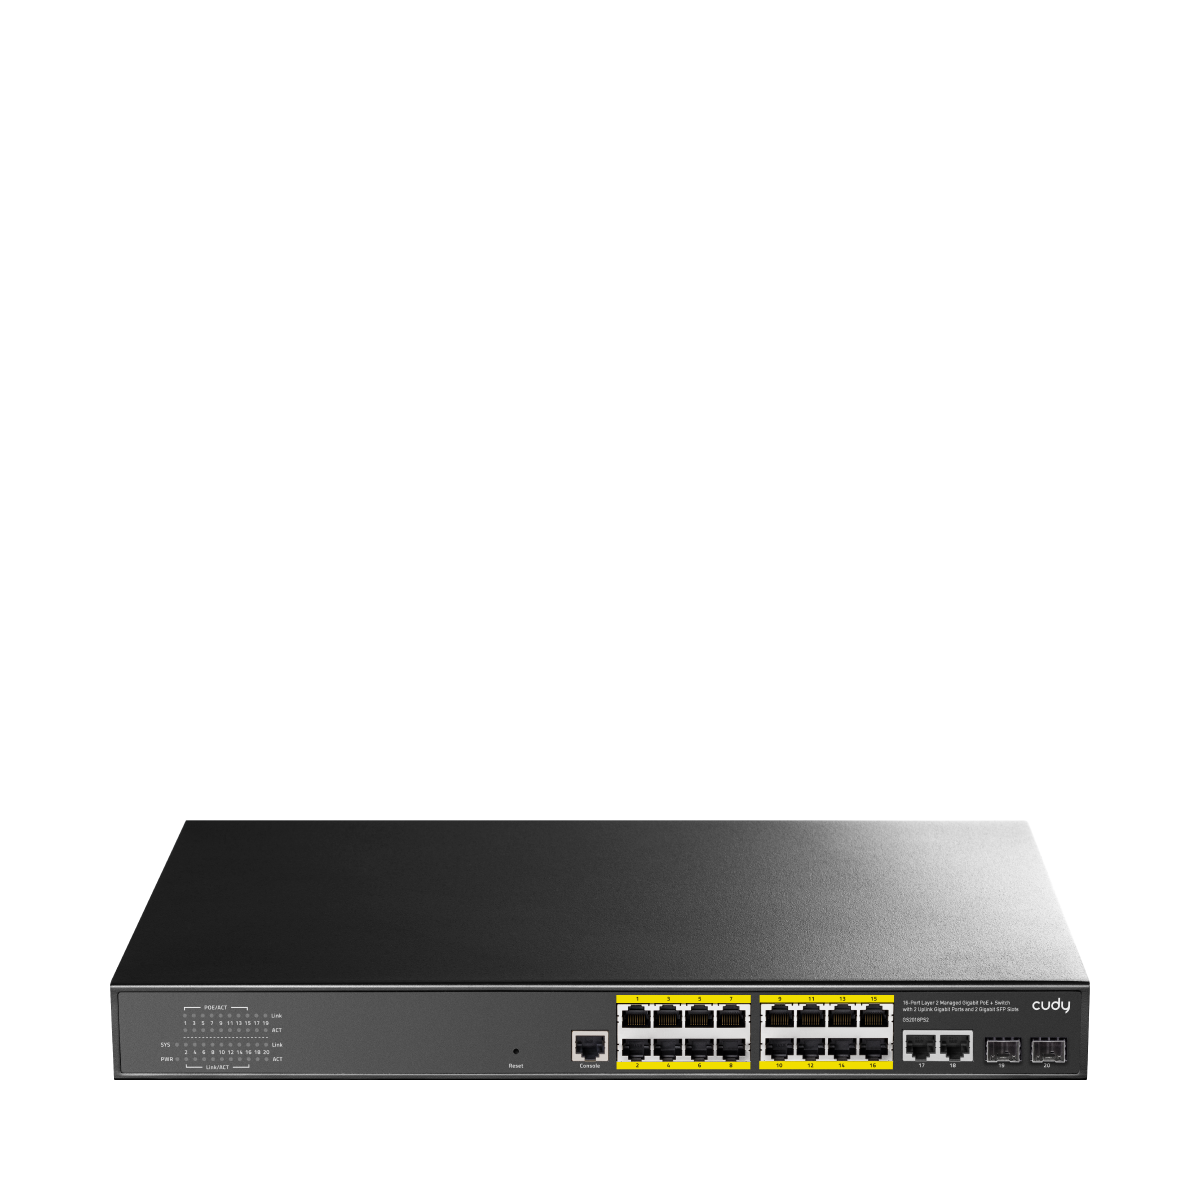 16-GbE PoE L2 Managed Switch with 2-GbE and 2-SFP, GS2018PS2 1.0